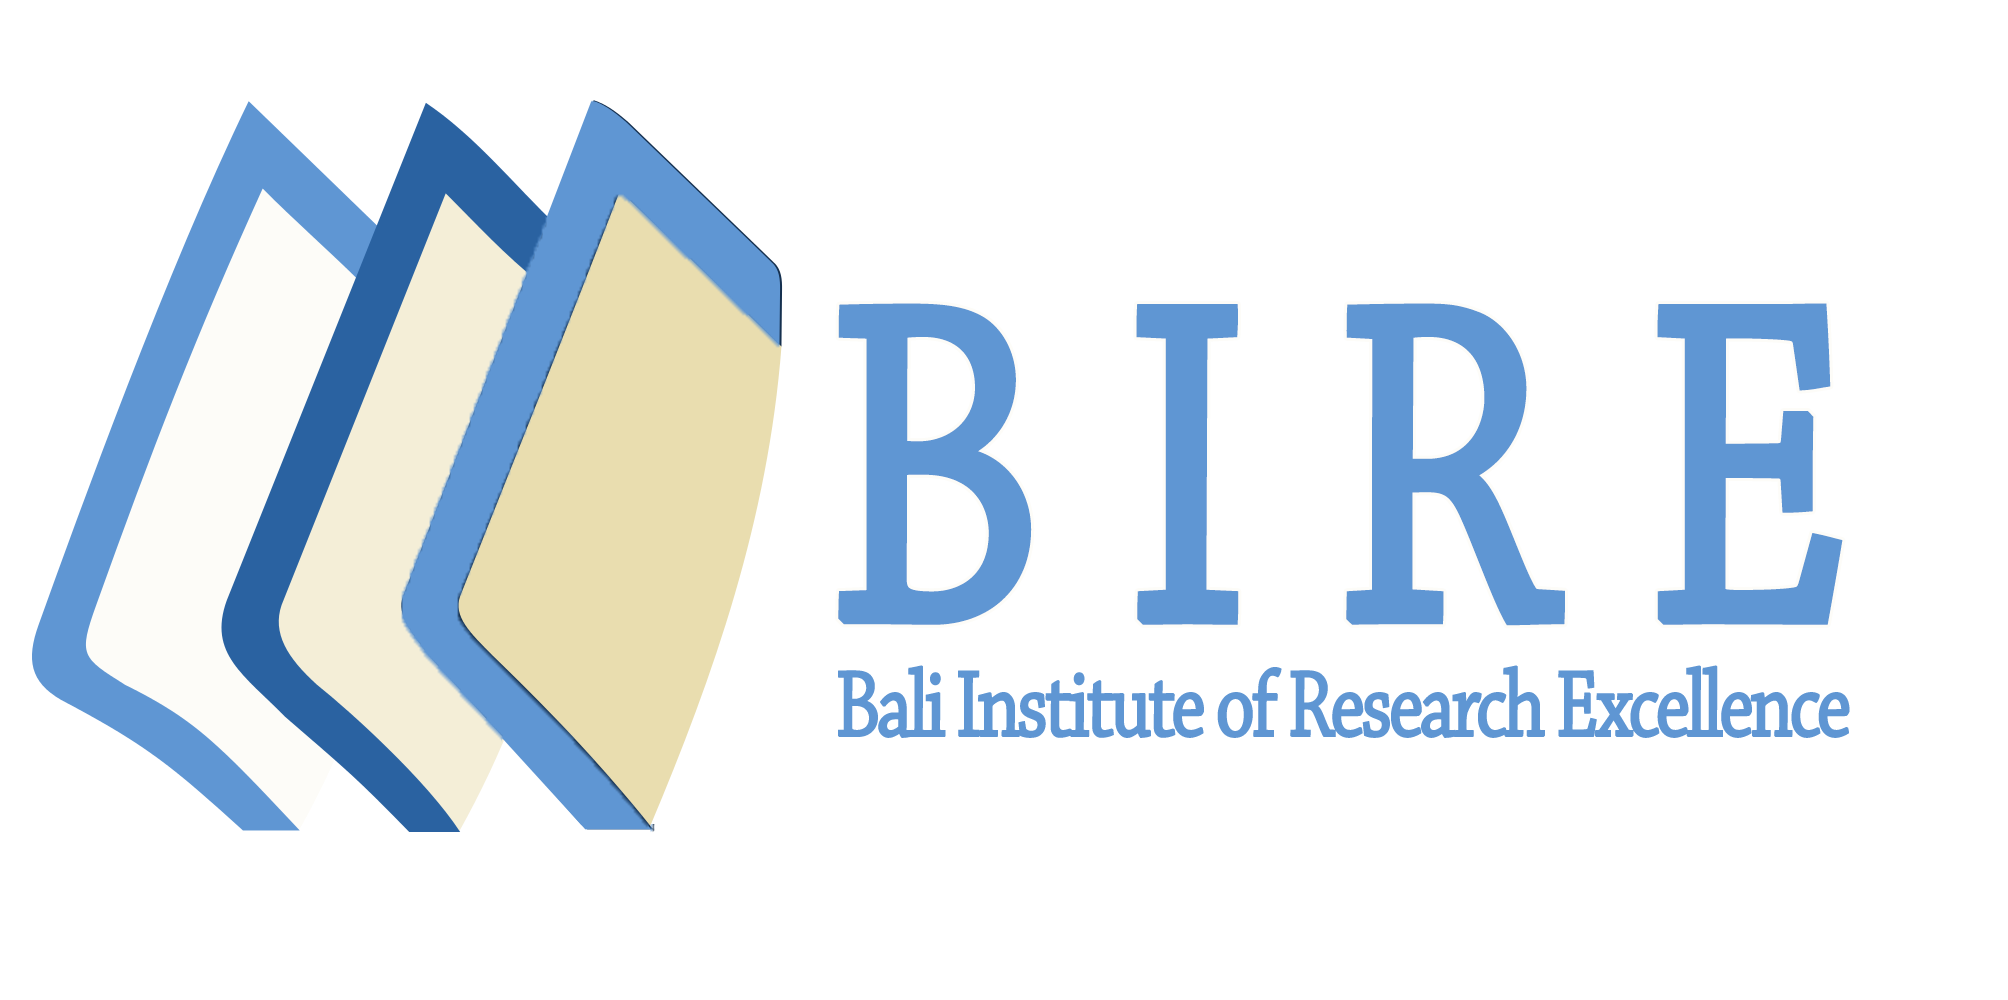 2020 International Conference on Current Research in Business Management, Social Sciences, Economics and Information Technology